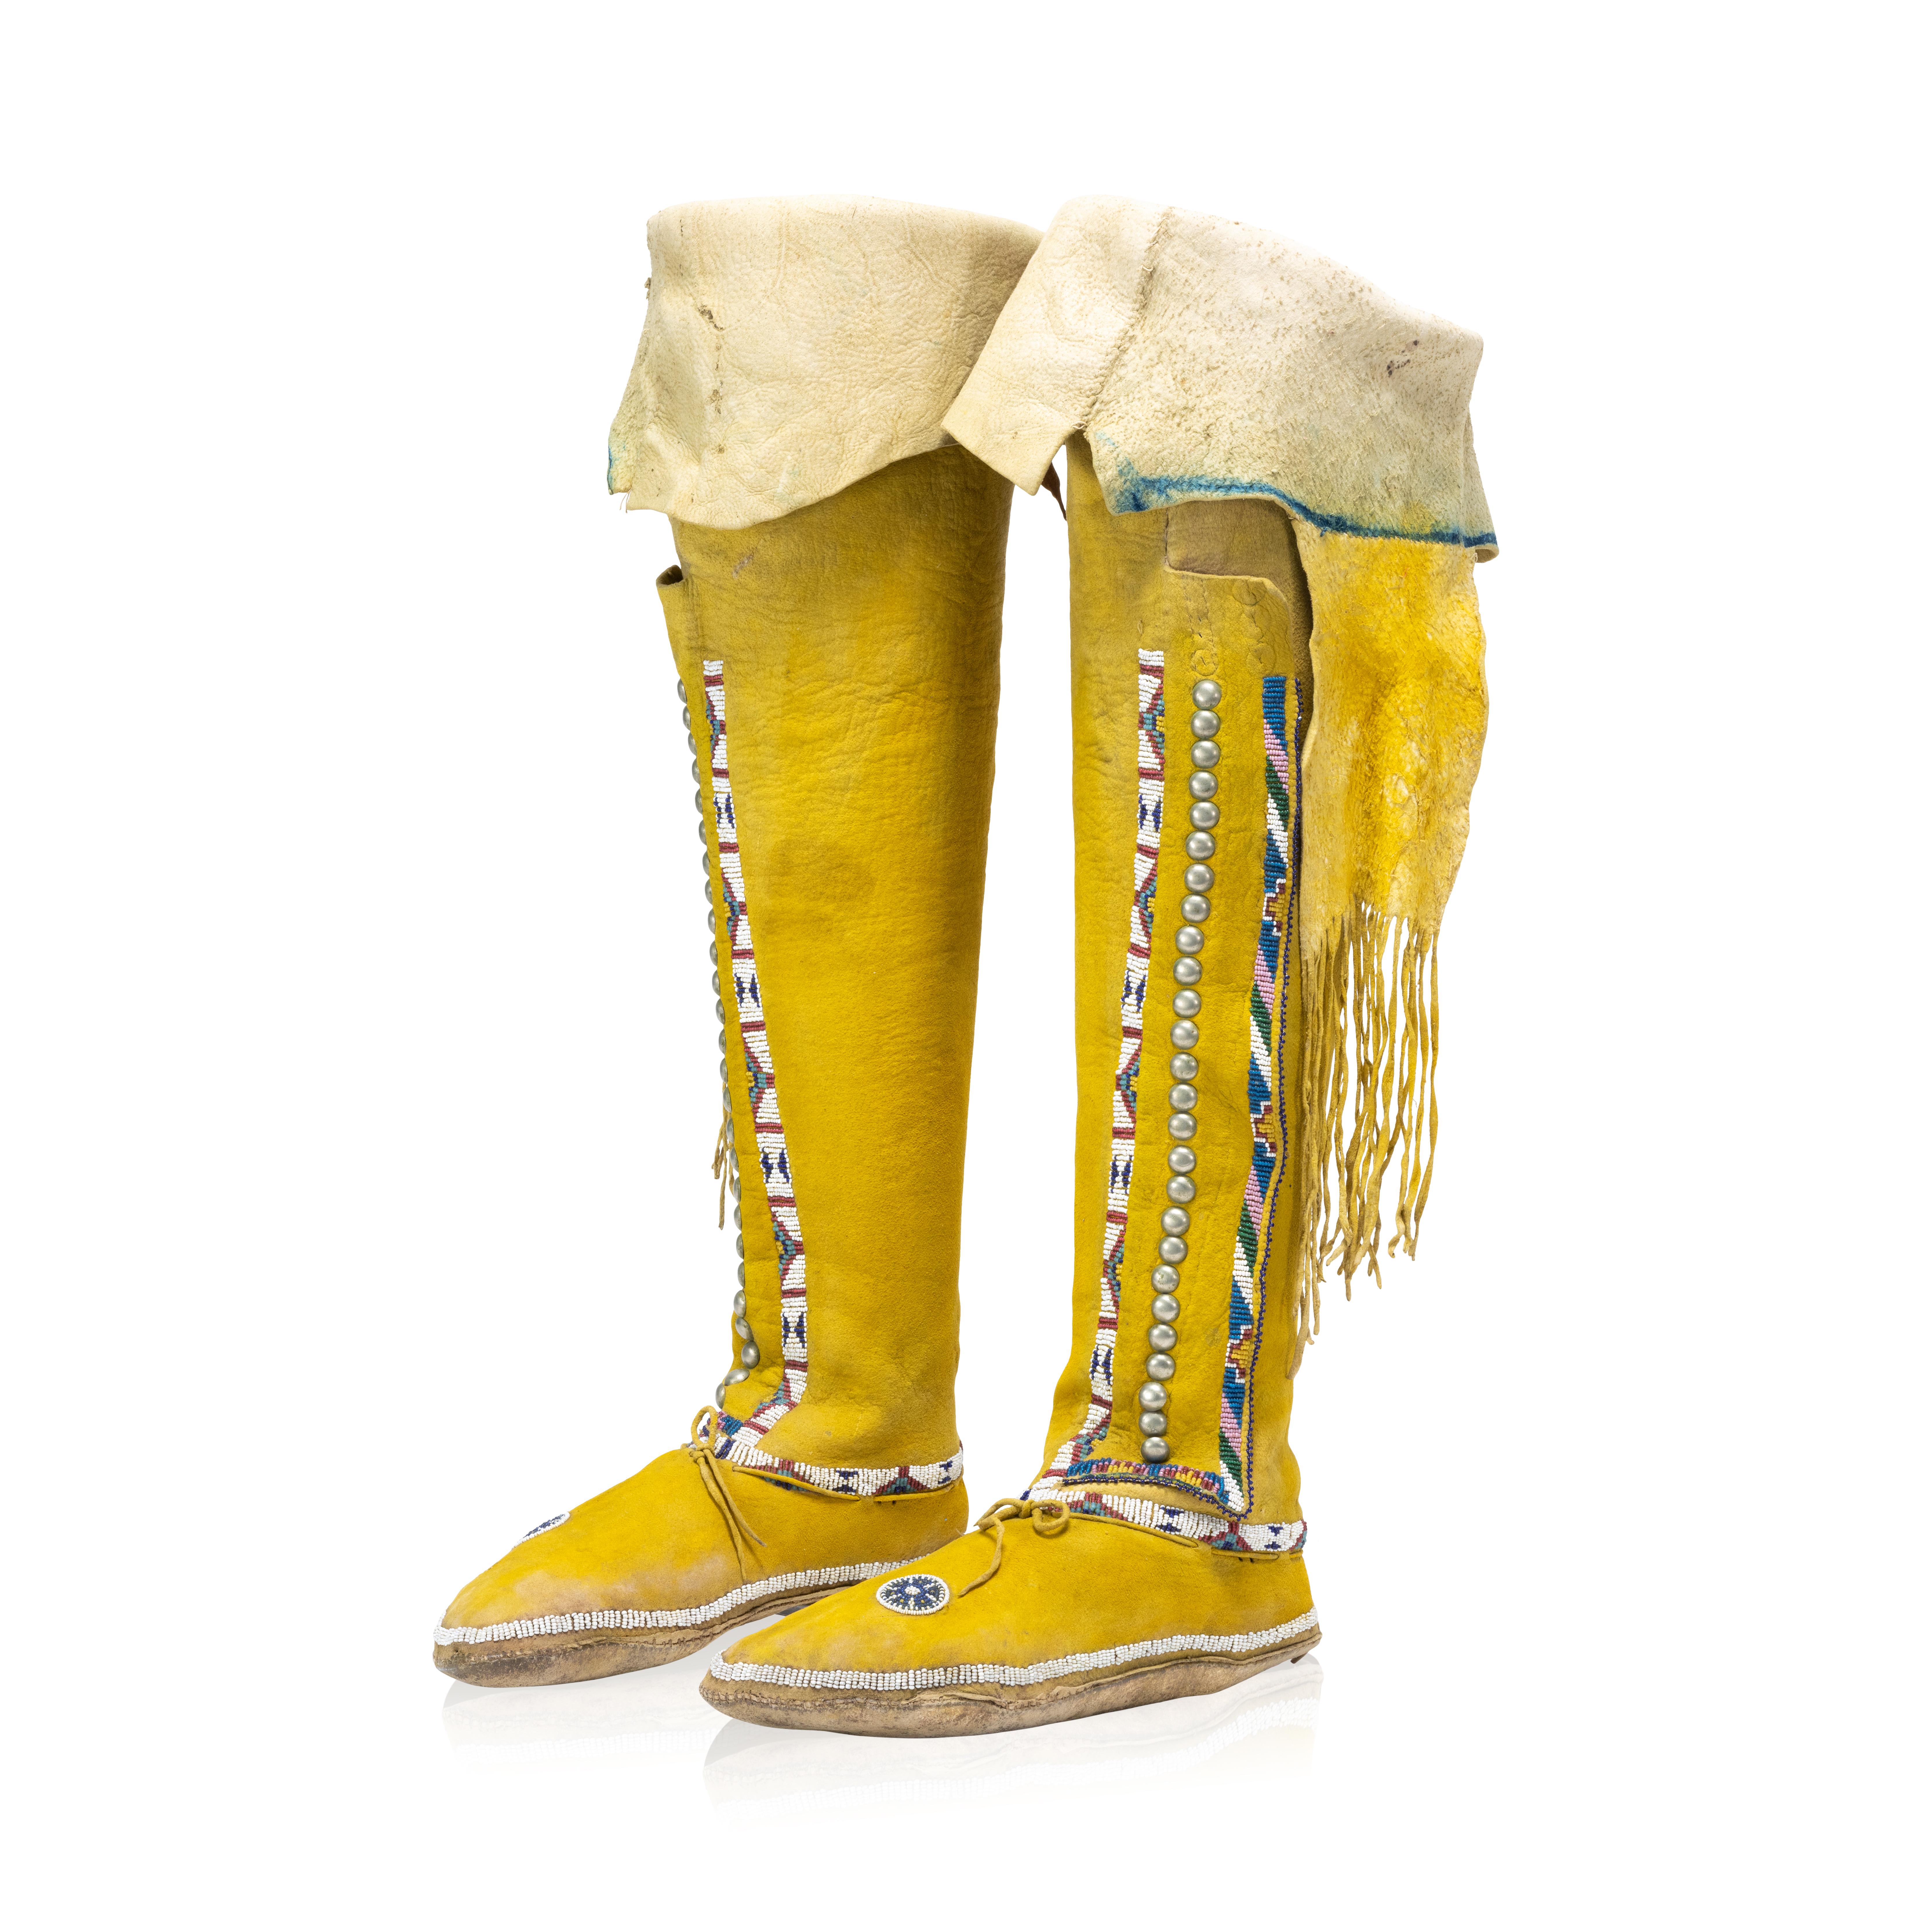 Southern plains Hightop Moccasins
Item Number: AG2312

Exceptional Kiowa/Comanche hightop moccasins dyed with yellow ochre. Adorned with a single beaded band above the sole, the leggings with two beaded bands down the seam and across the cuff,